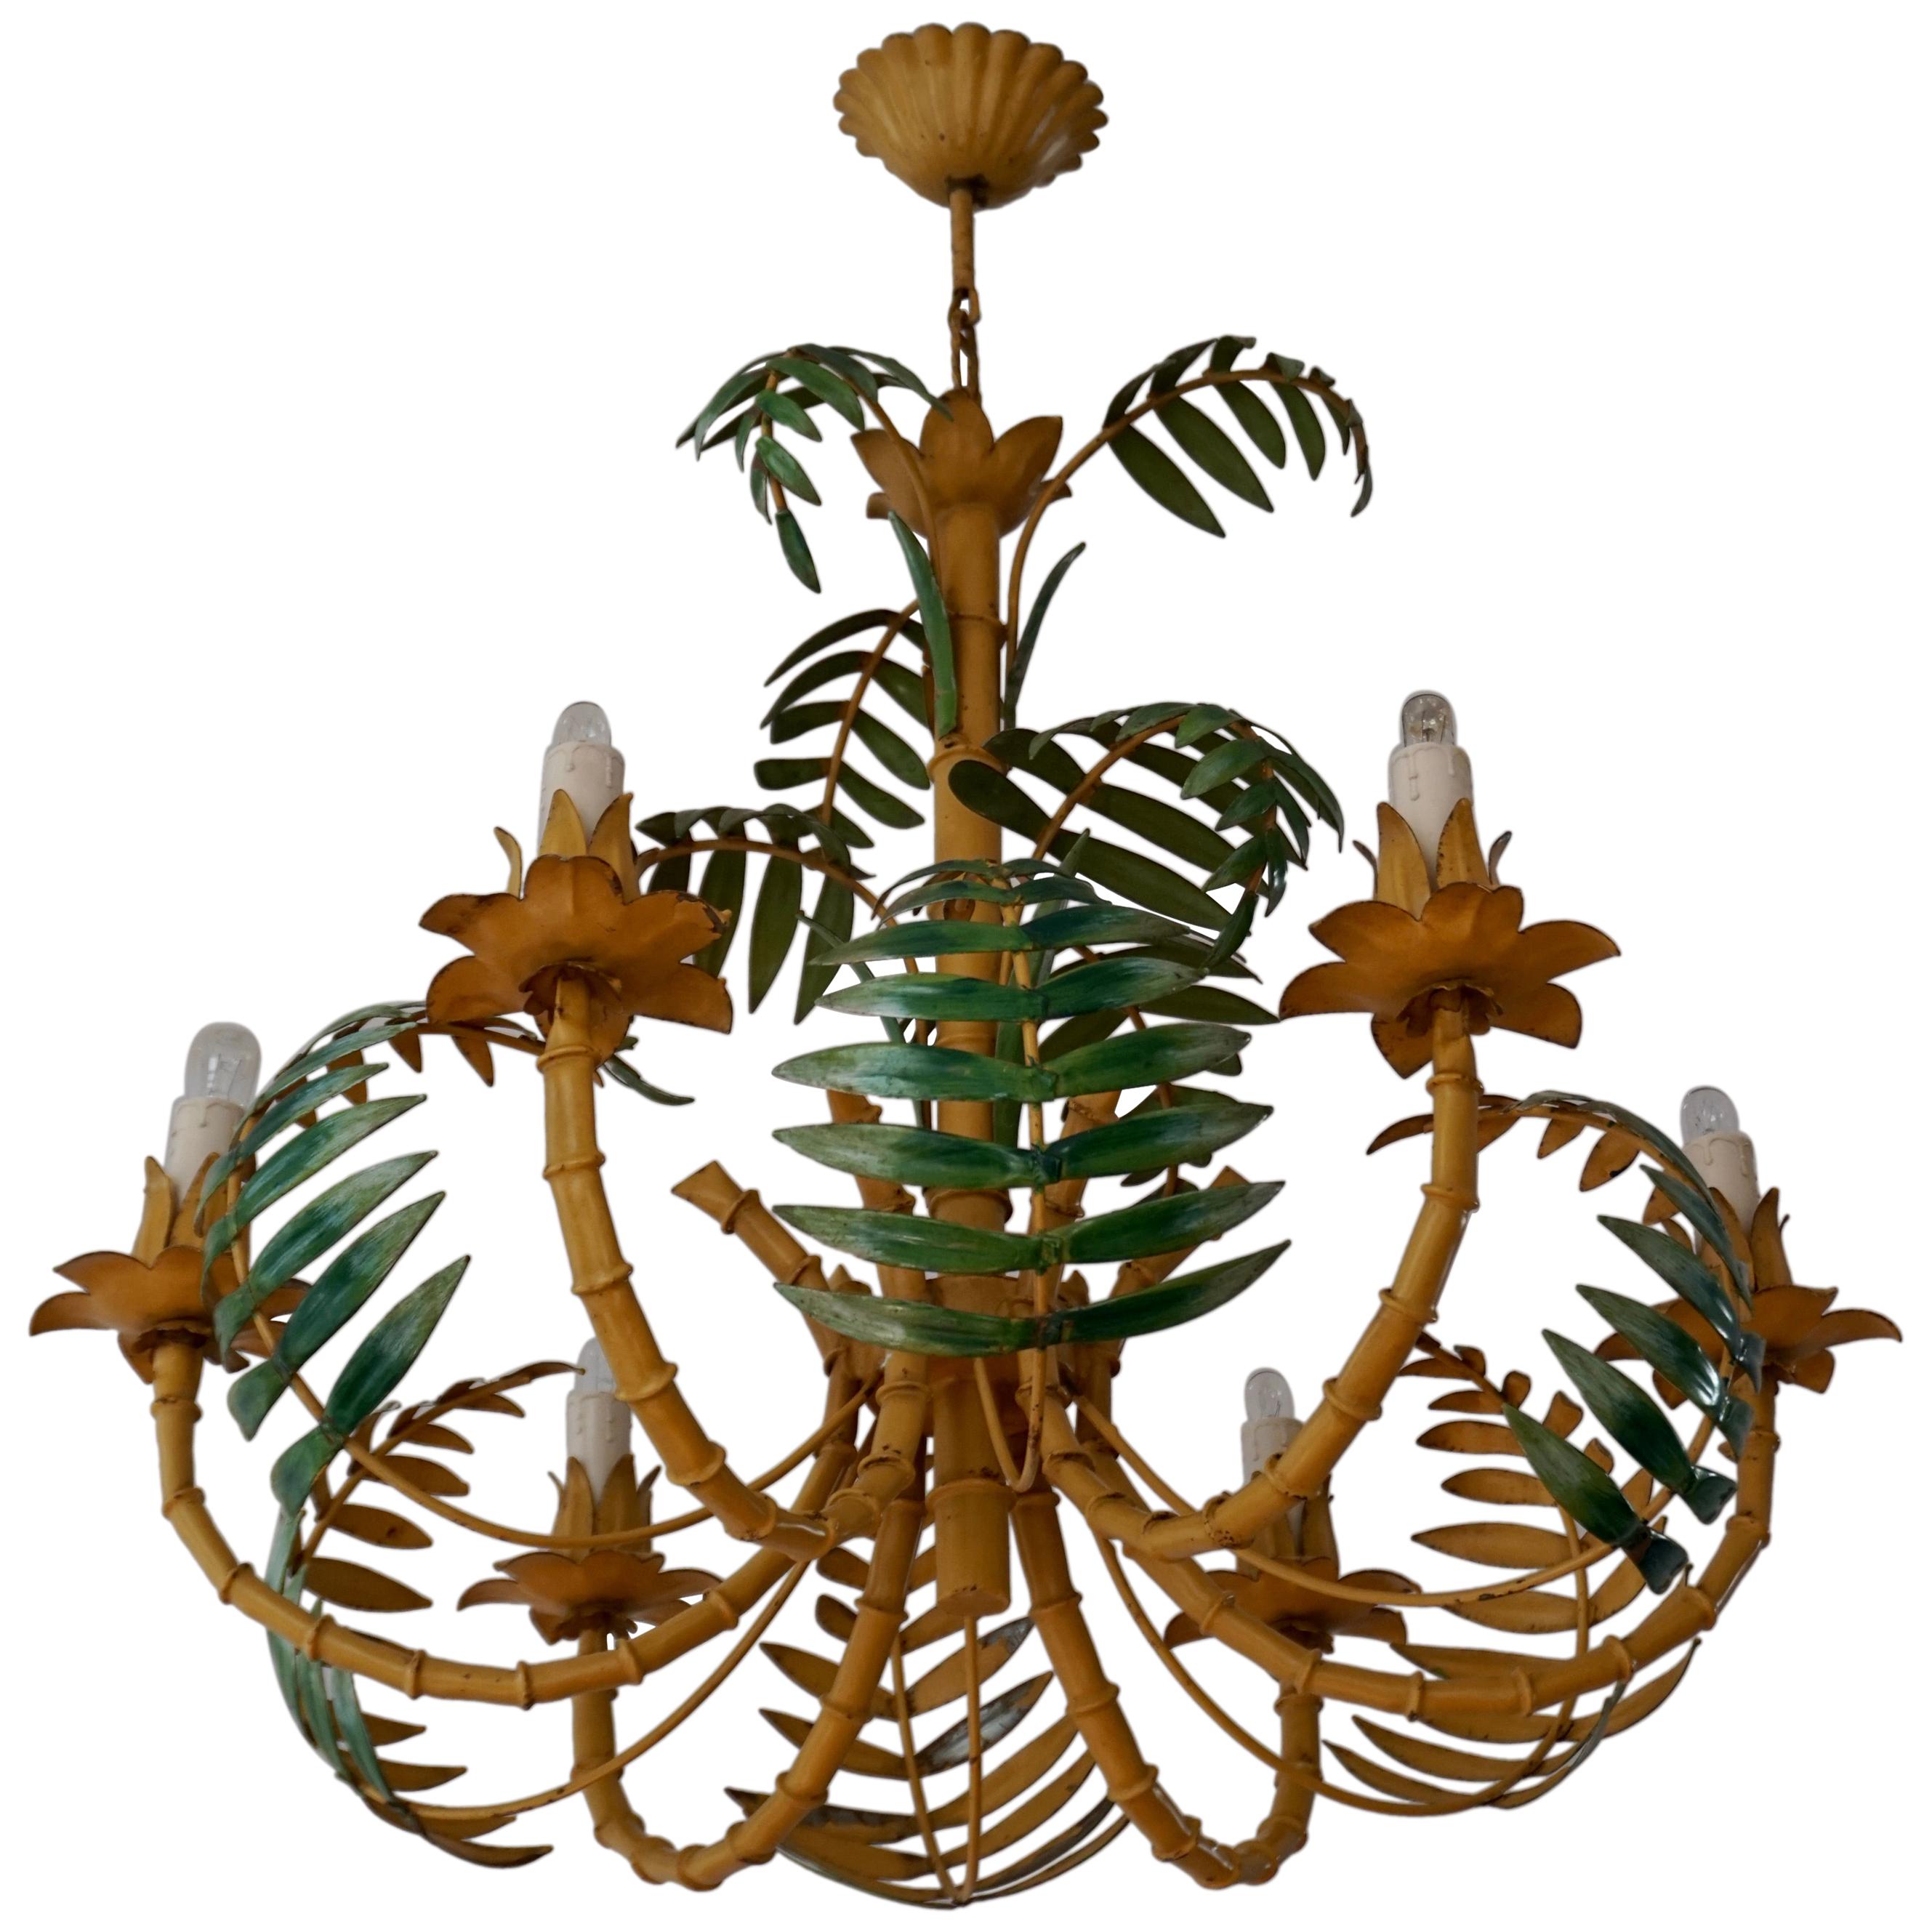 Stylish Hollywood Regency Tole and Faux Bamboo Chandelier Pendant